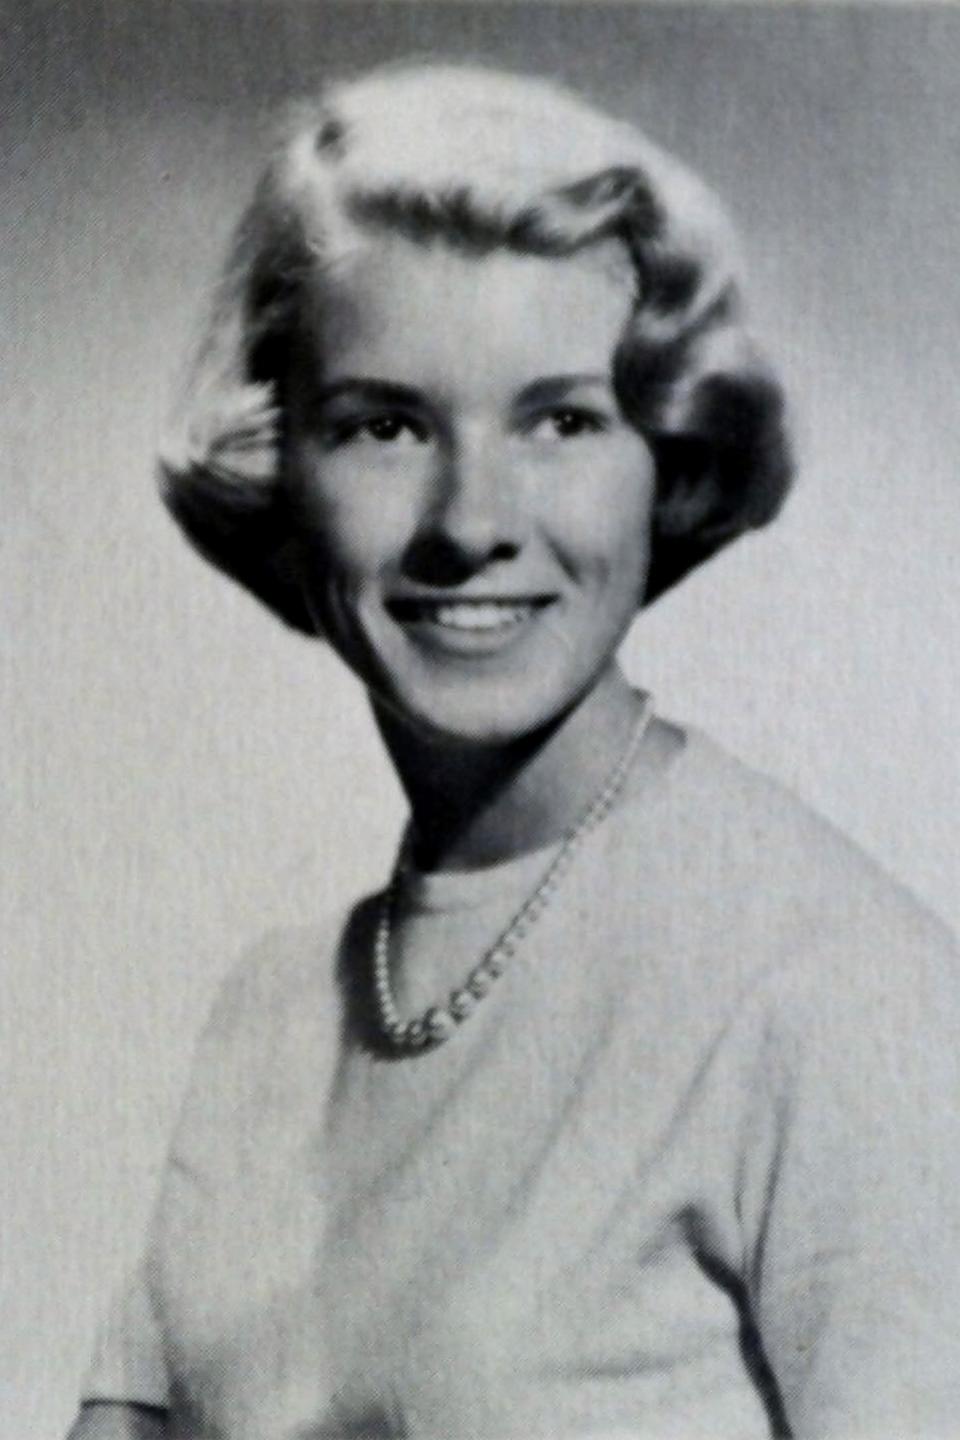 Stewart has always looked elegant and classic, as evidenced by her high school yearbook photo from 1959.